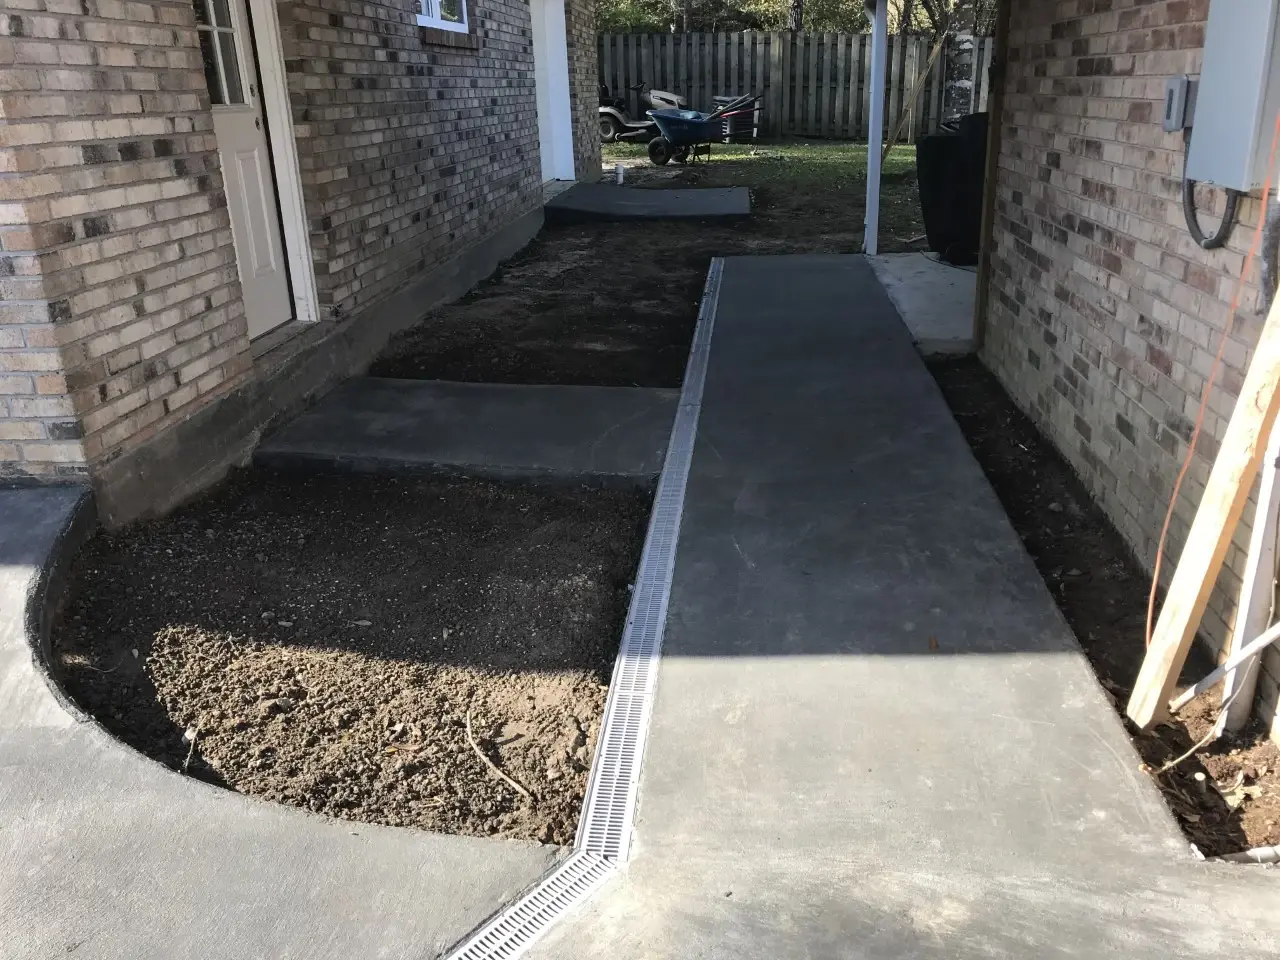 Concrete Sidewalk in Diamonhead, Ms. formed and poured by PNE Construction